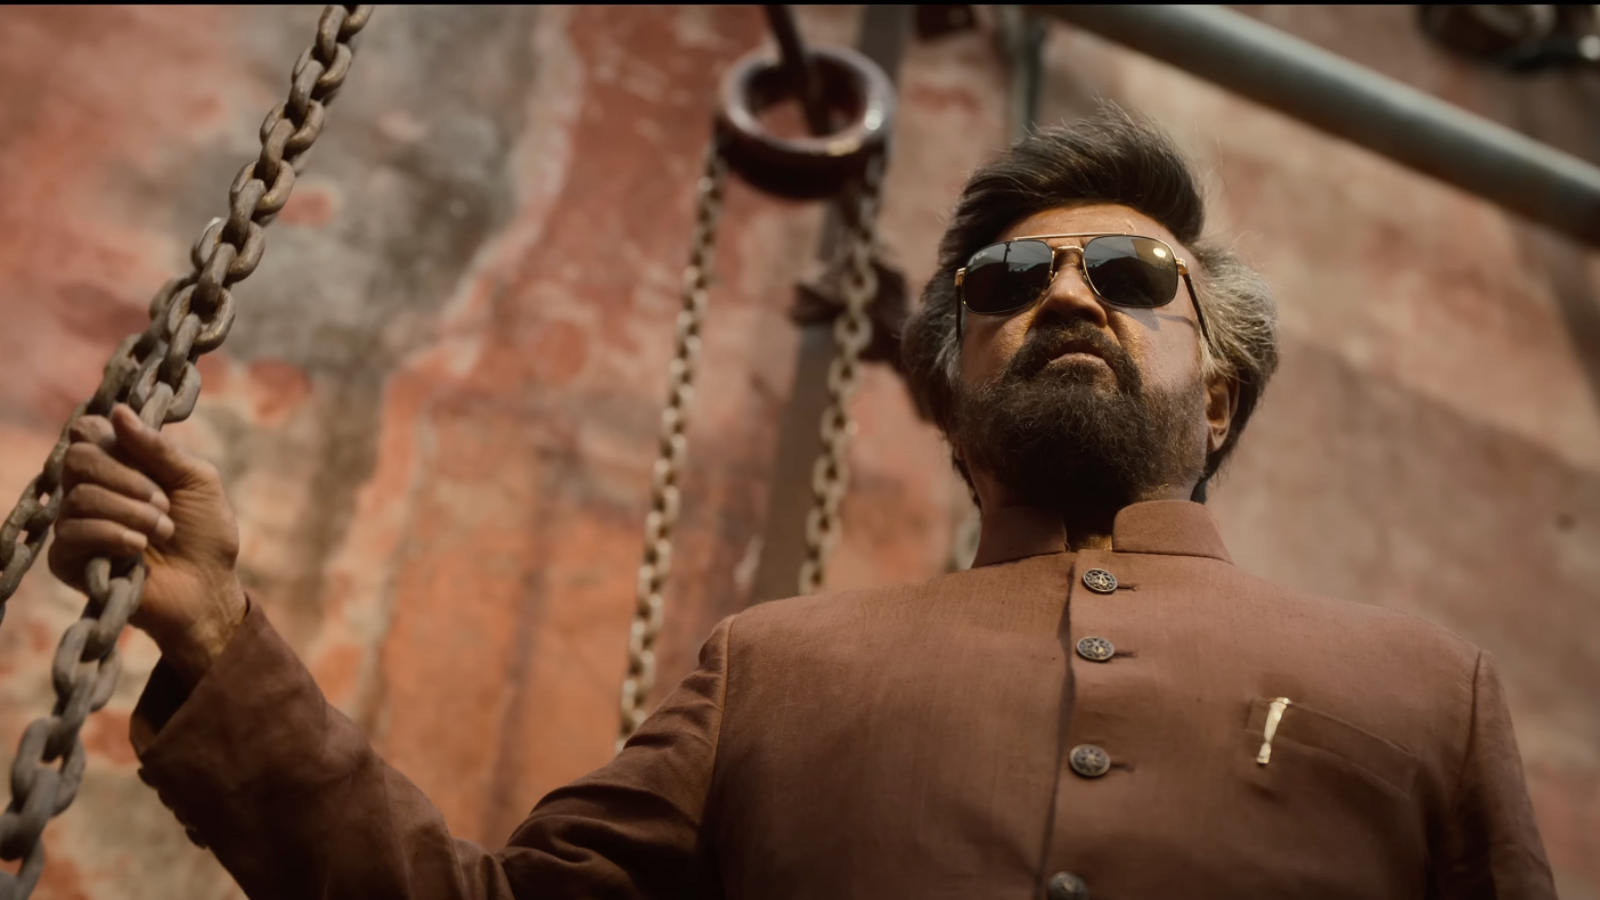 android, lal salaam box office day 6: aishwarya rajinikanth’s film continues its underwhelming run, yet to hit rs 15 crore mark